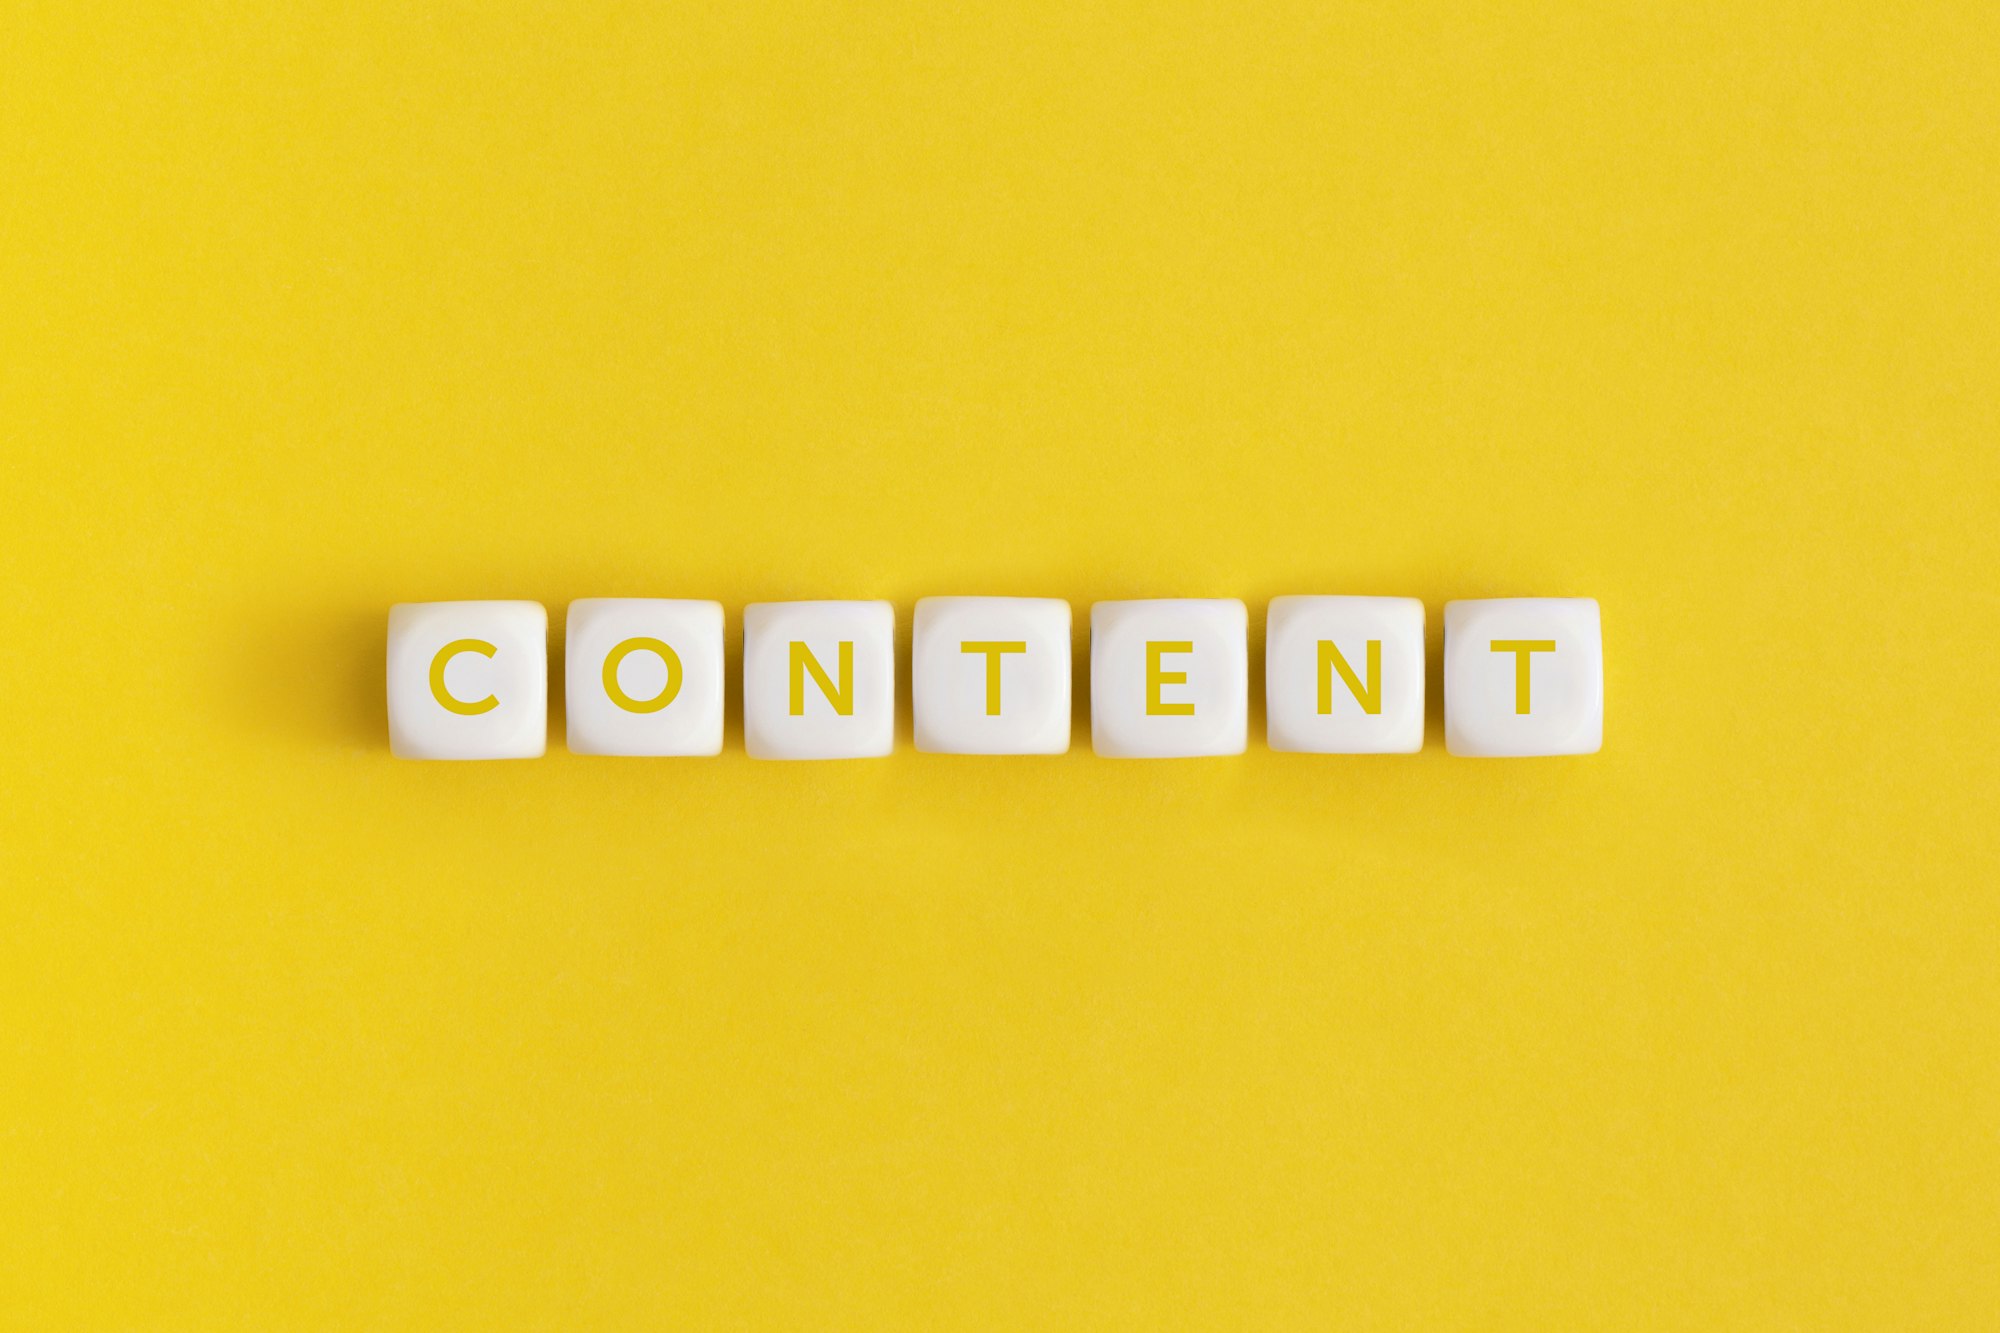 The word "Content on a white cubes